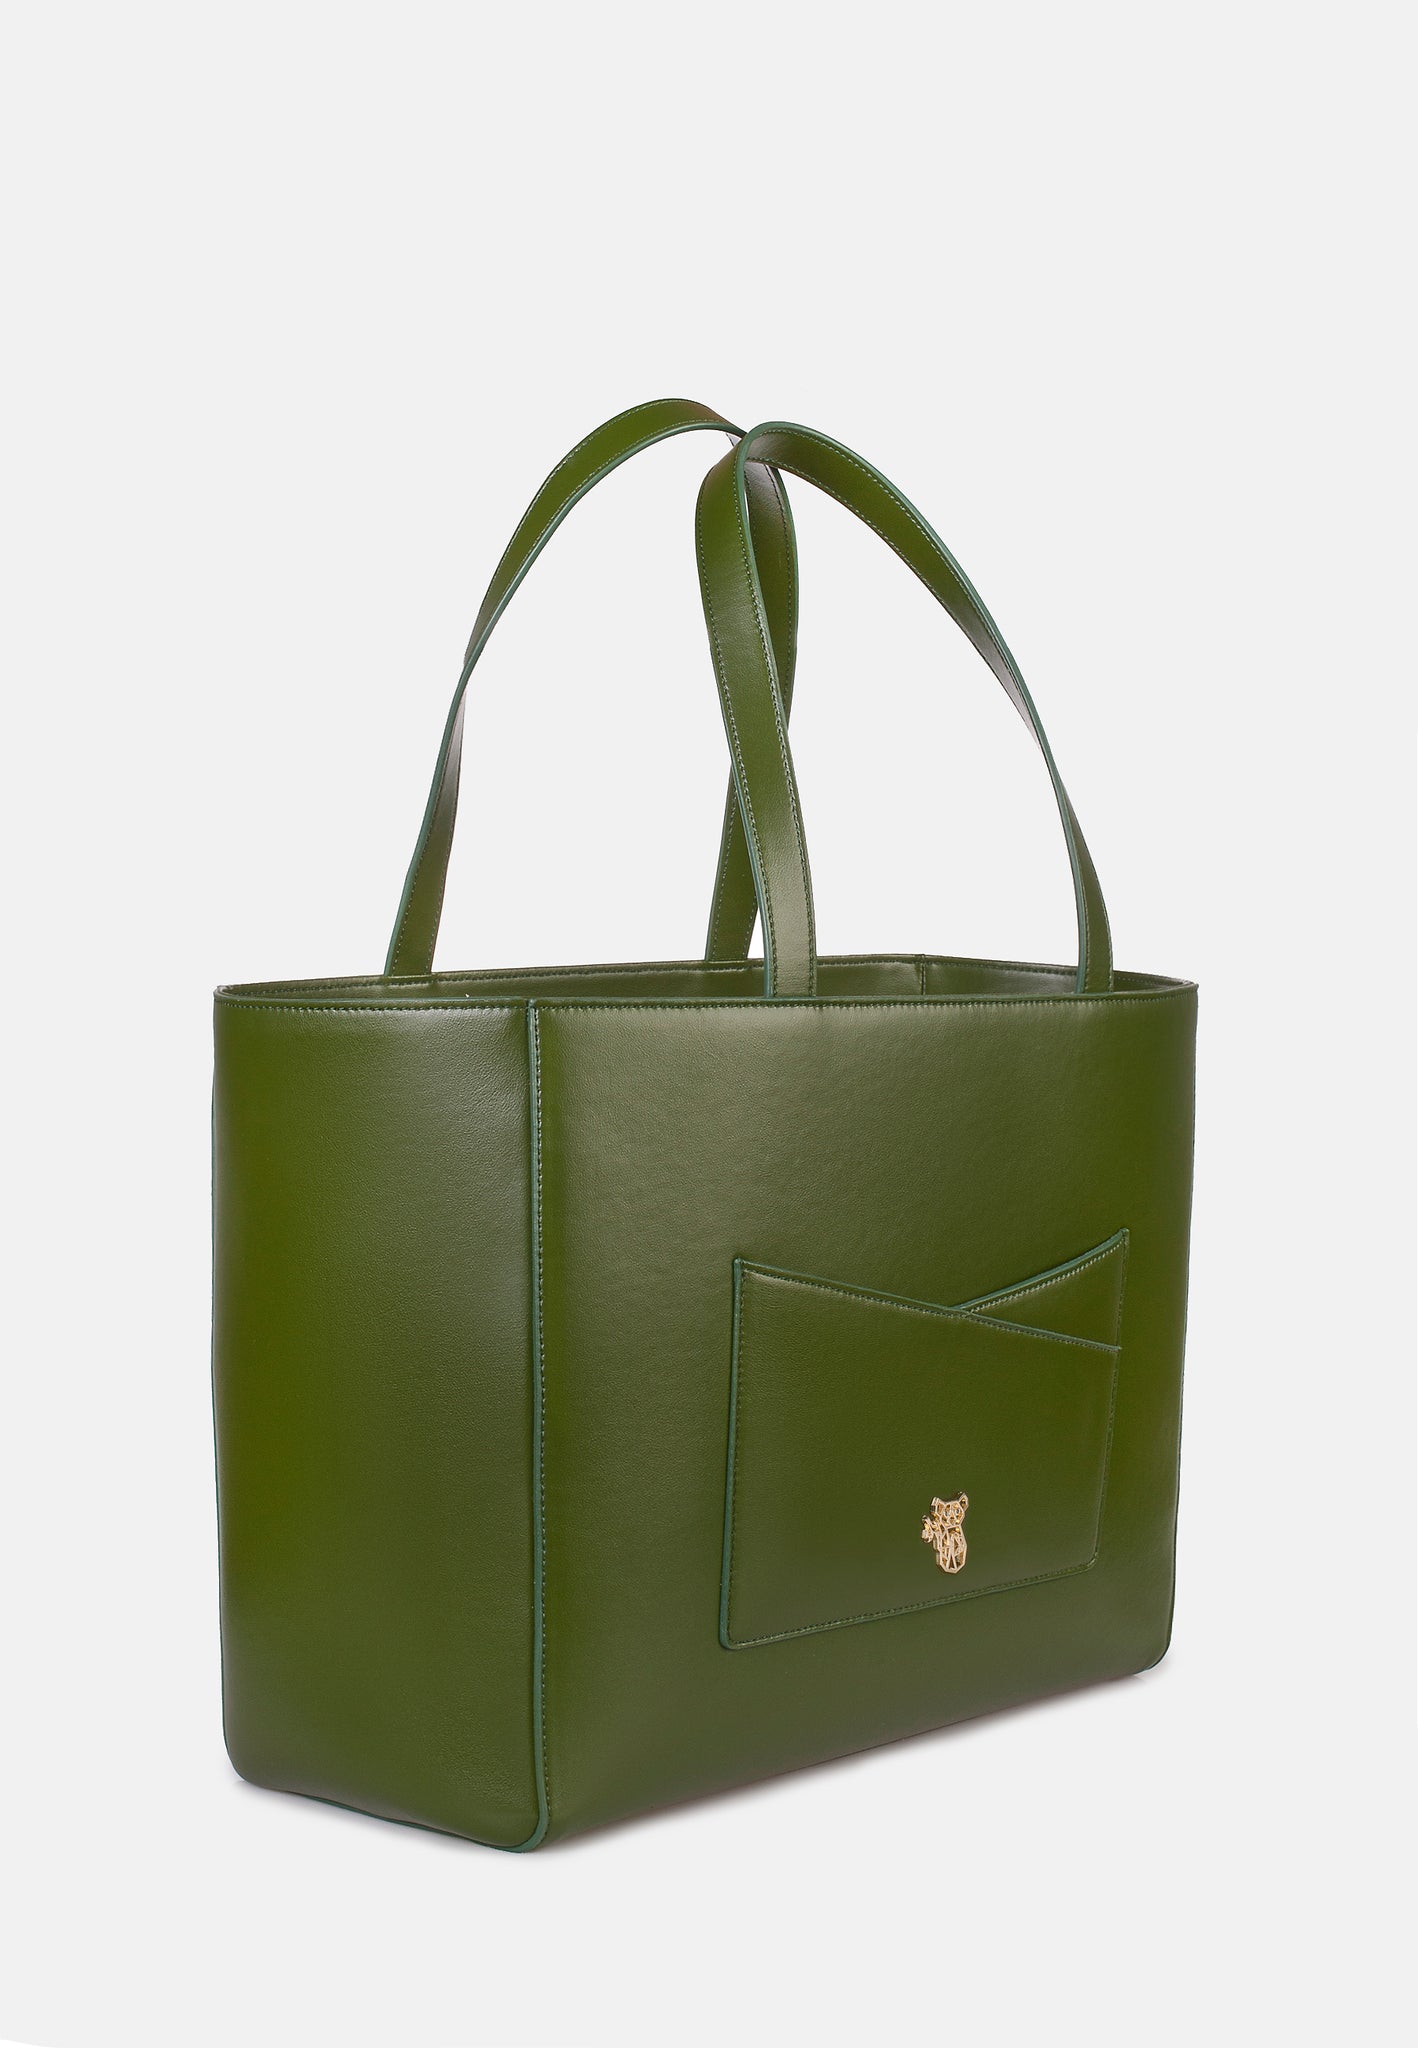 The Tote Bag Green